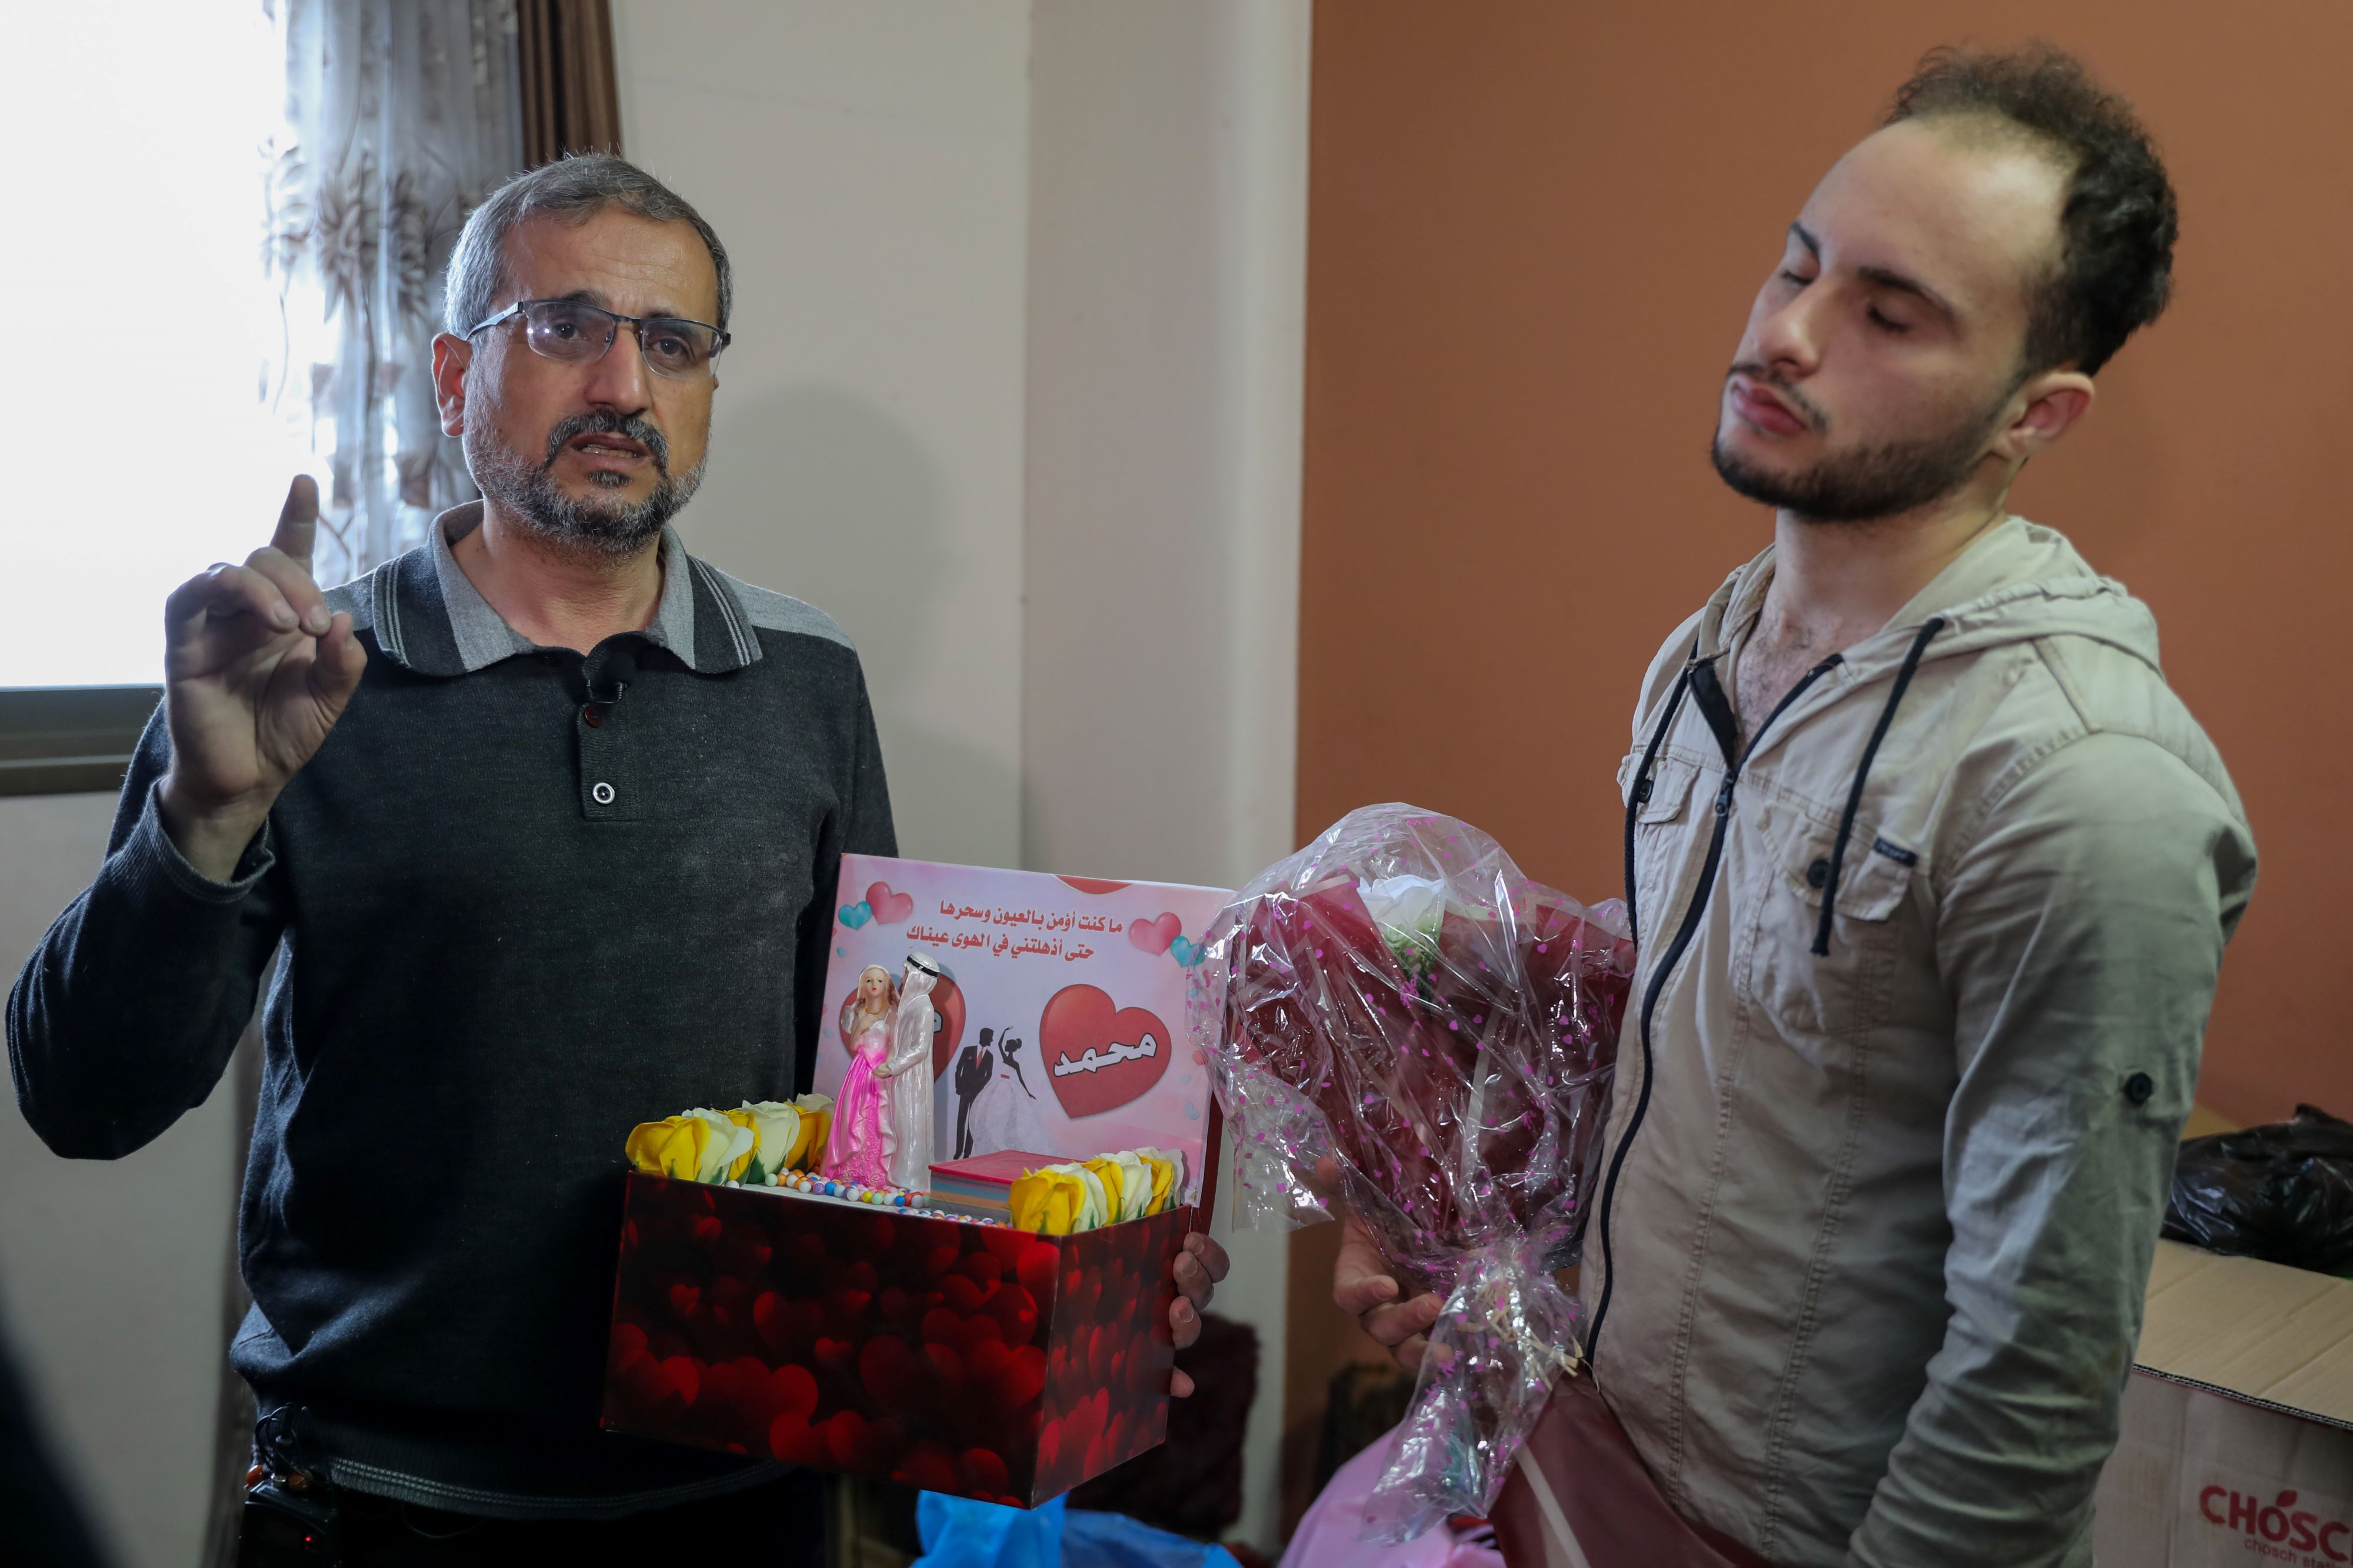 Dania's fiance, Muhammed Saad, holding a flower bouquet he had brought to Dania, and standing next to her father, Alaa, who holds her dowry box (MEE/Muhammed Hajjar)